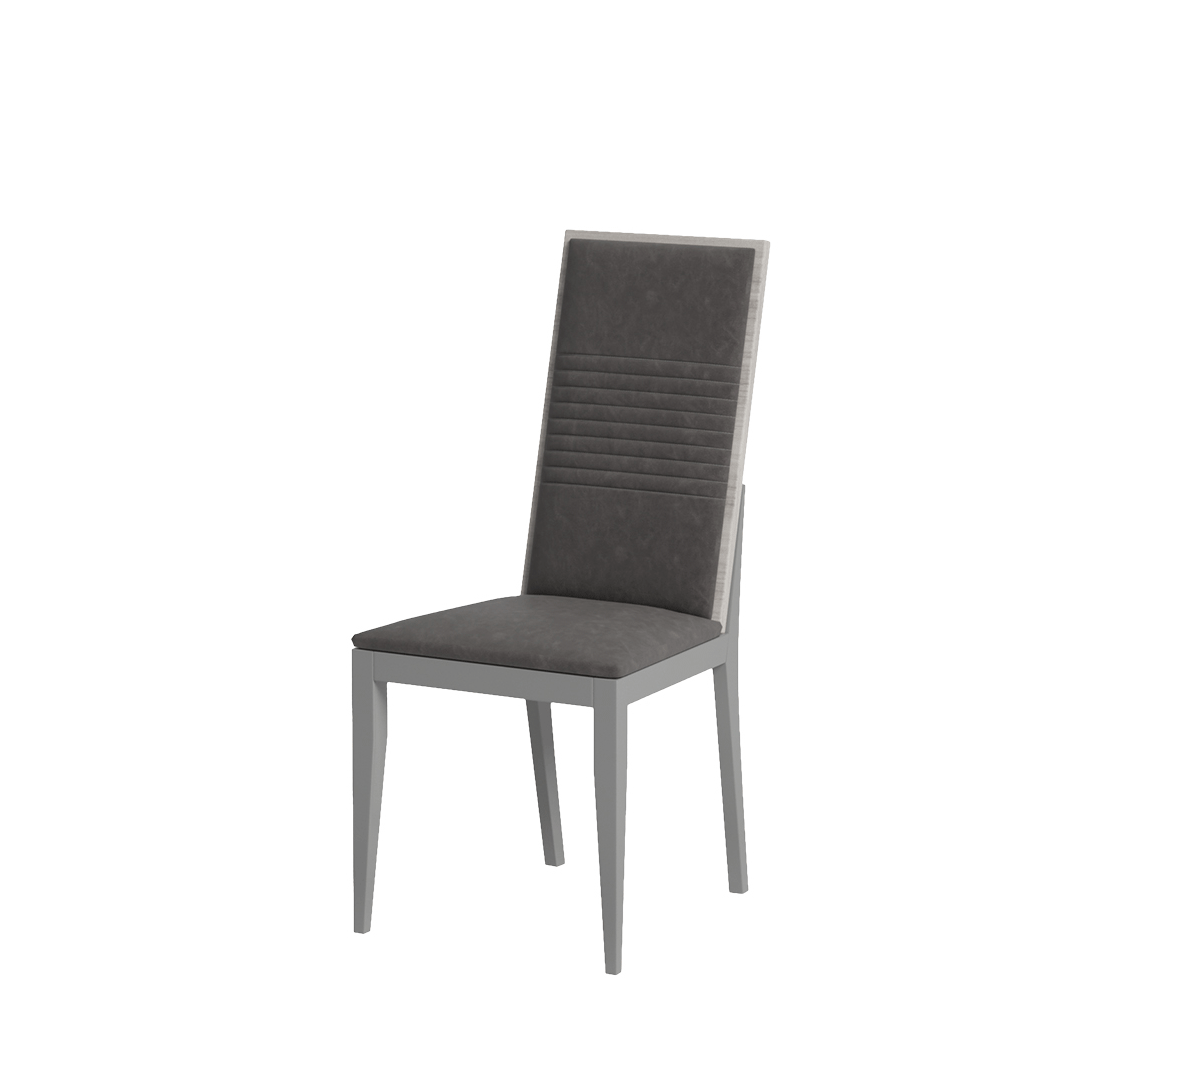 Brands Arredoclassic Dining Room, Italy Mia Chair